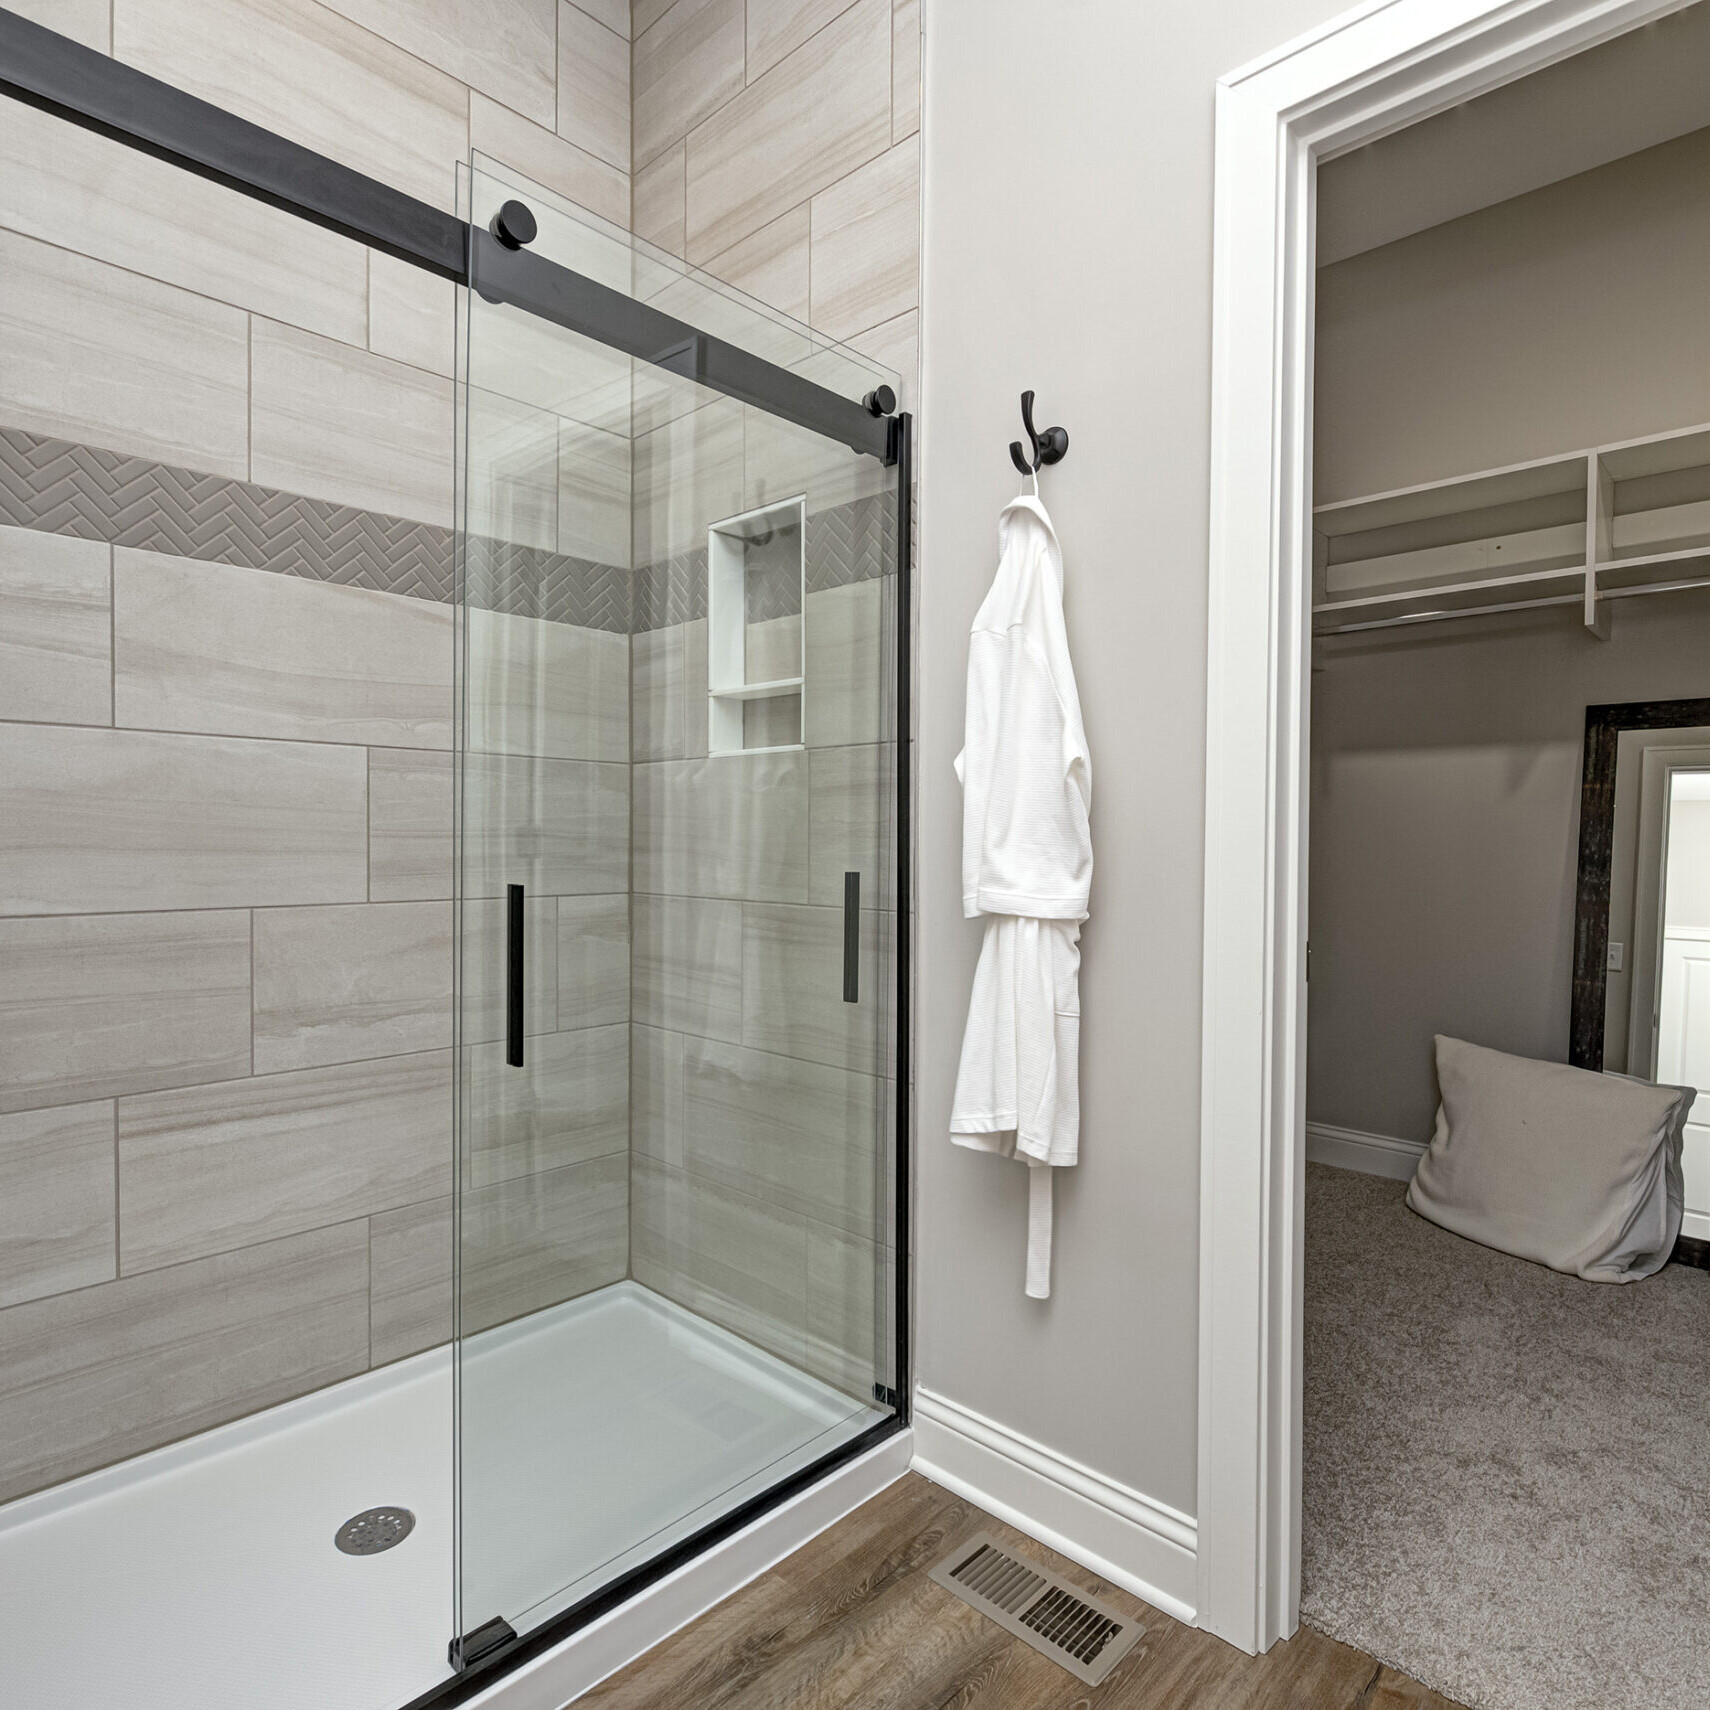 A luxurious bathroom with a glass shower door and a spacious walk-in closet. Perfect for those seeking the finest in Custom Homes Westfield Indiana and Indianapolis Custom Homes. Experience the epitome of elegance